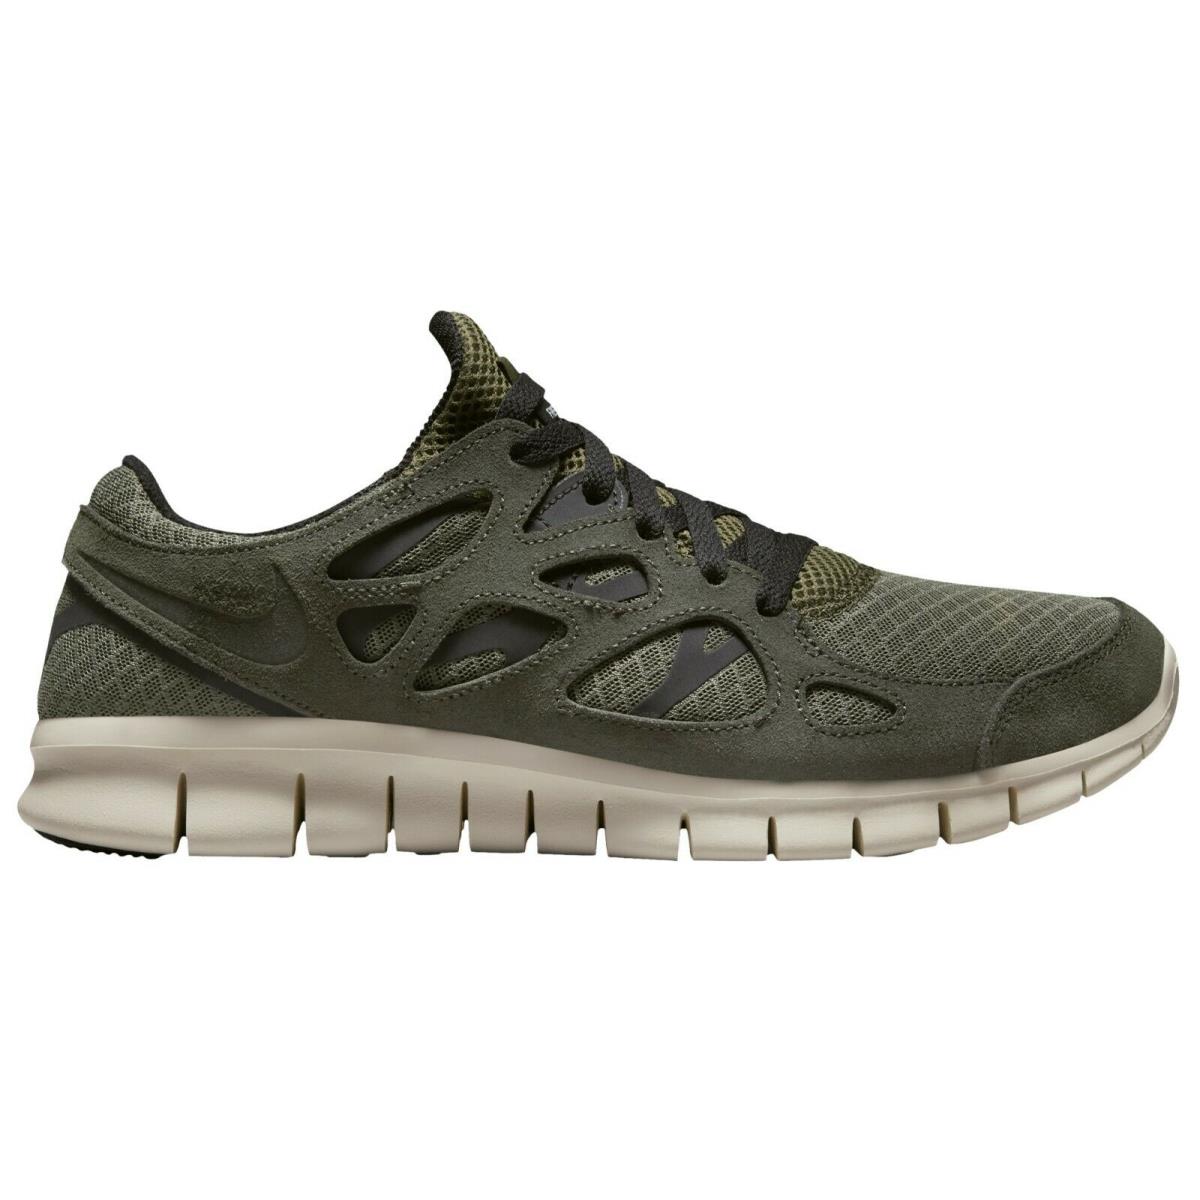 Nike Free Run 2 Mens 537732-305 Sequoia Olive Sail Black Running Shoes Size 8